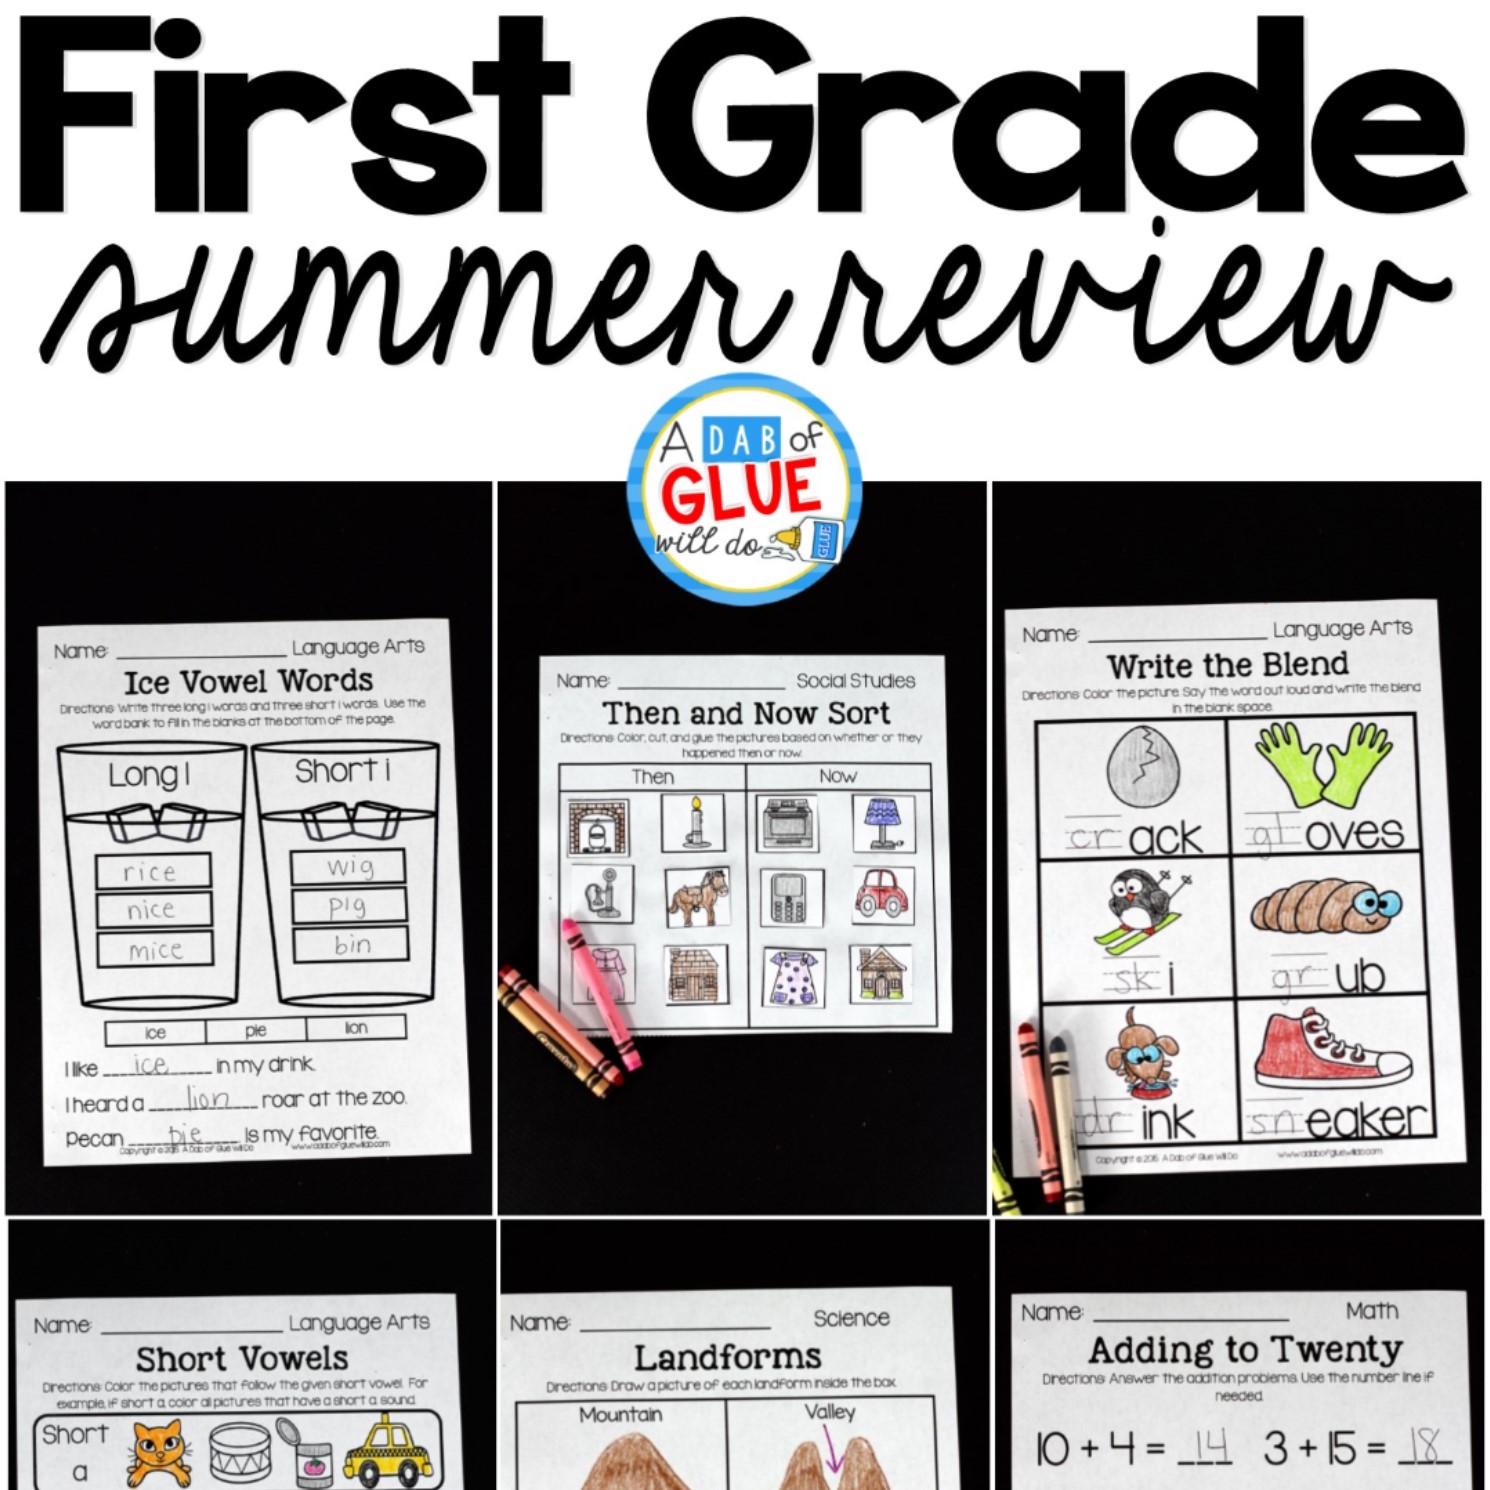 The perfect NO PREP First Grade Summer Review to help your students with hands-on learning over summer break! Give your students going into Second Grade fun review printables to help prevent the summer slide and set them up for Second Grade success.  This review is packed full of engaging homework review activities that will bring a smile to their sweet faces as they work on math, language arts, social studies, and science! Parents will enjoy the student's focus on summer homework and Second Grade teachers will LOVE their new students ready for Second Grade work.